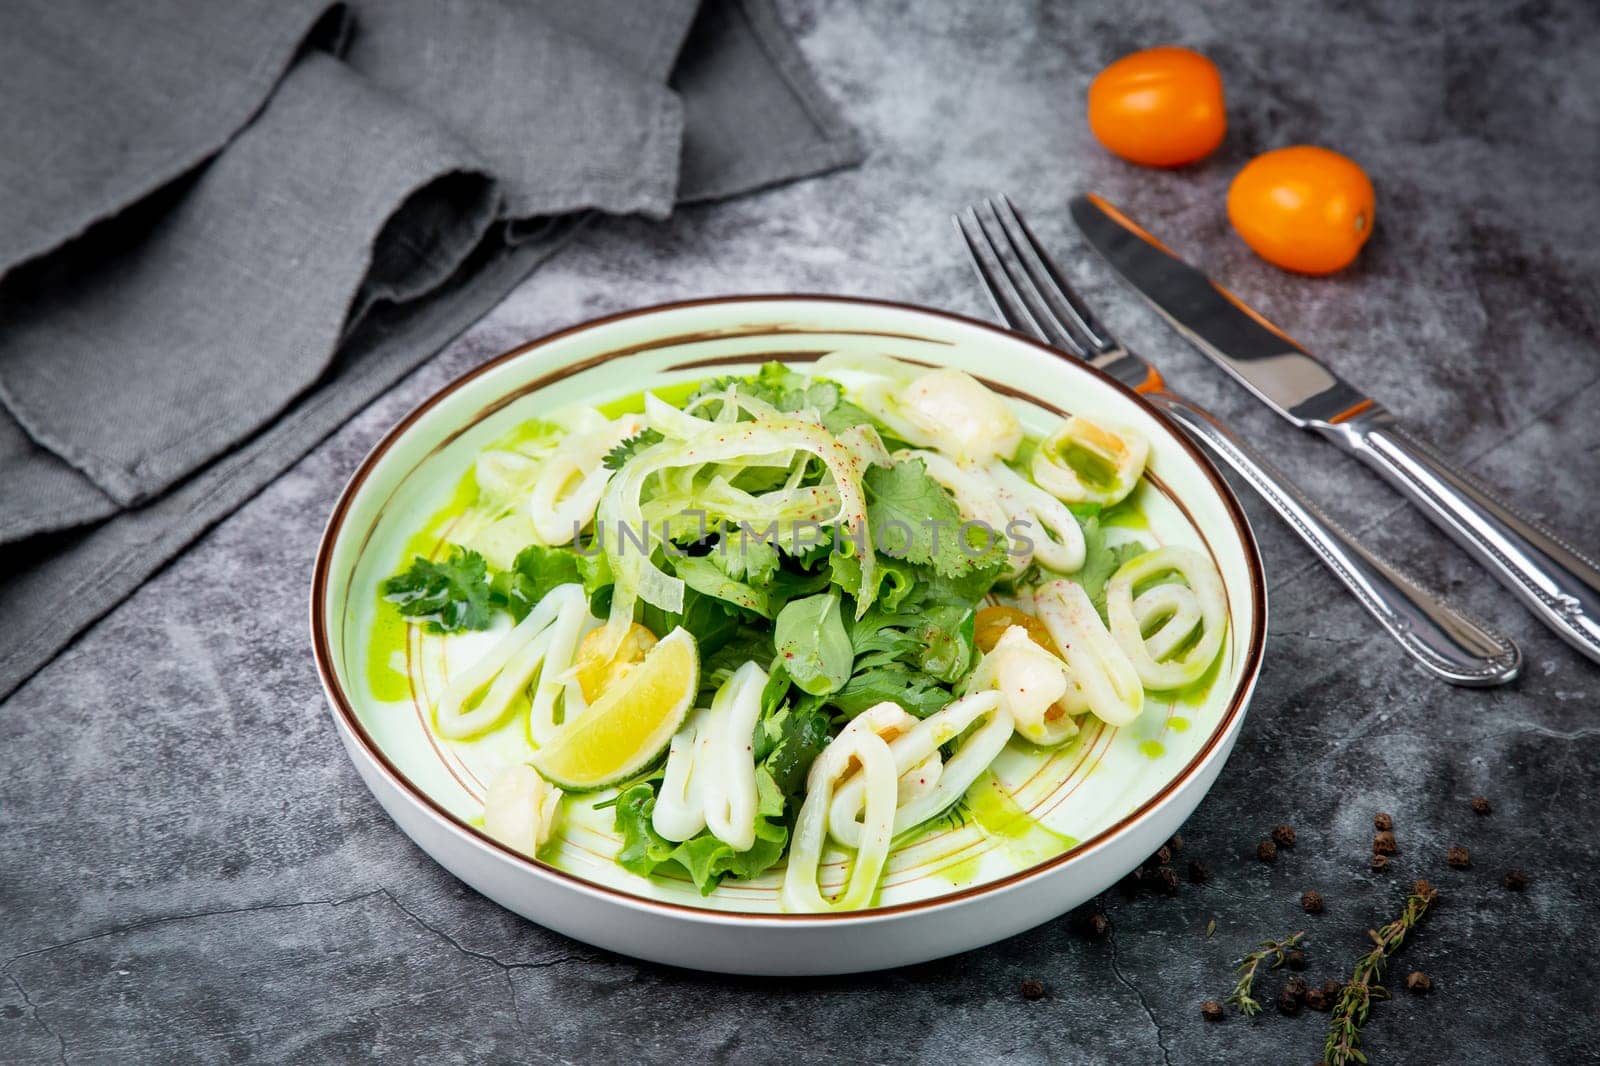 salad with arugula, parsley, lime and squid rings, side view by tewolf